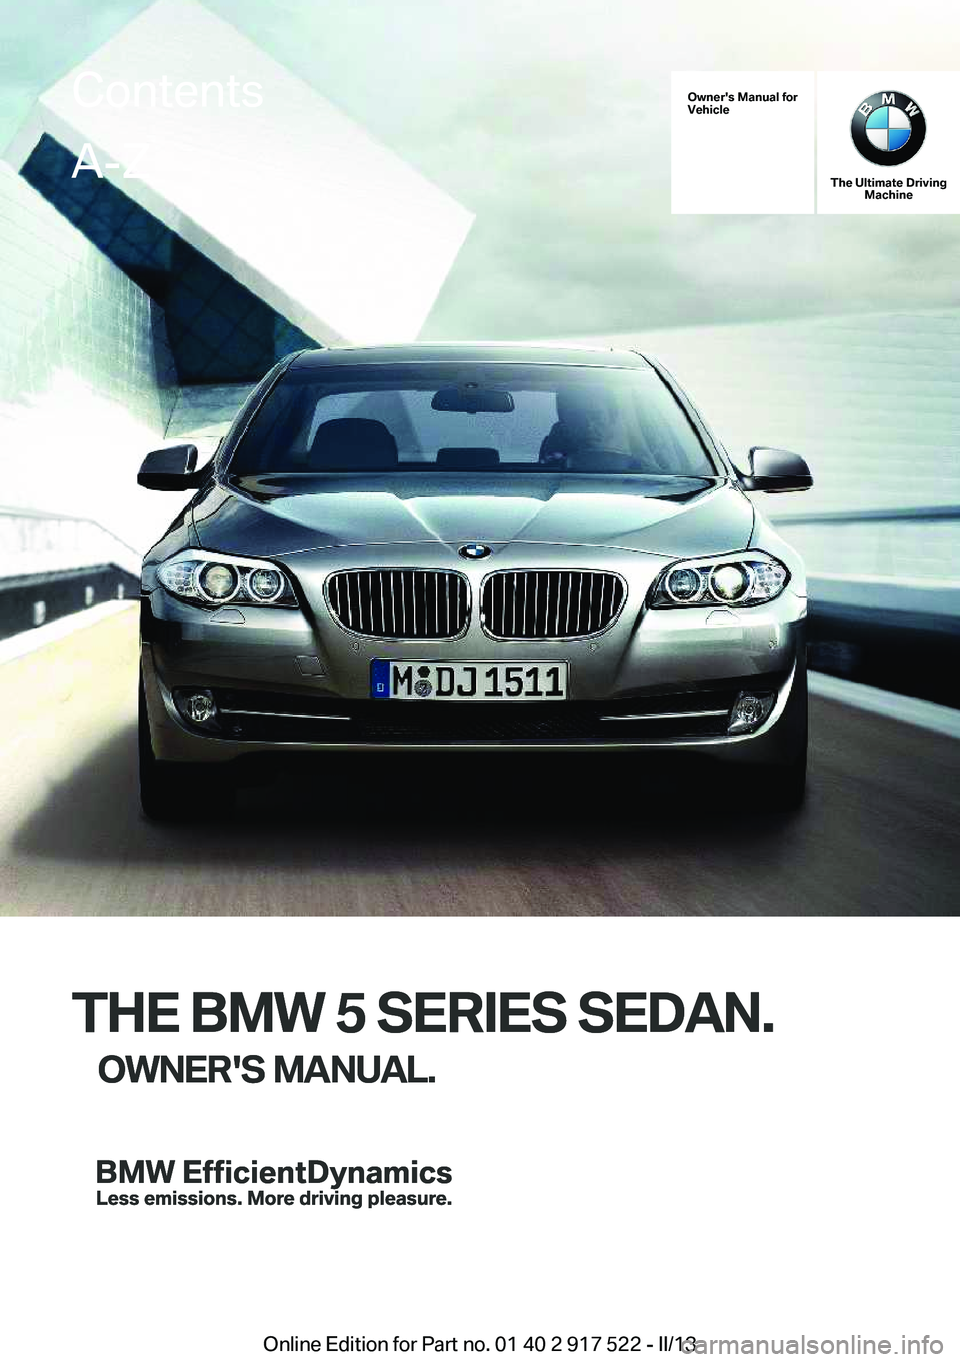 BMW 535I XDRIVE 2013  Owners Manual Owner's Manual for
Vehicle
THE BMW 5 SERIES SEDAN.
OWNER'S MANUAL.
The Ultimate Driving Machine
THE BMW 5 SERIES SEDAN.
OWNER'S MANUAL.
ContentsA-Z
Online Edition for Part no. 01 40 2 917 